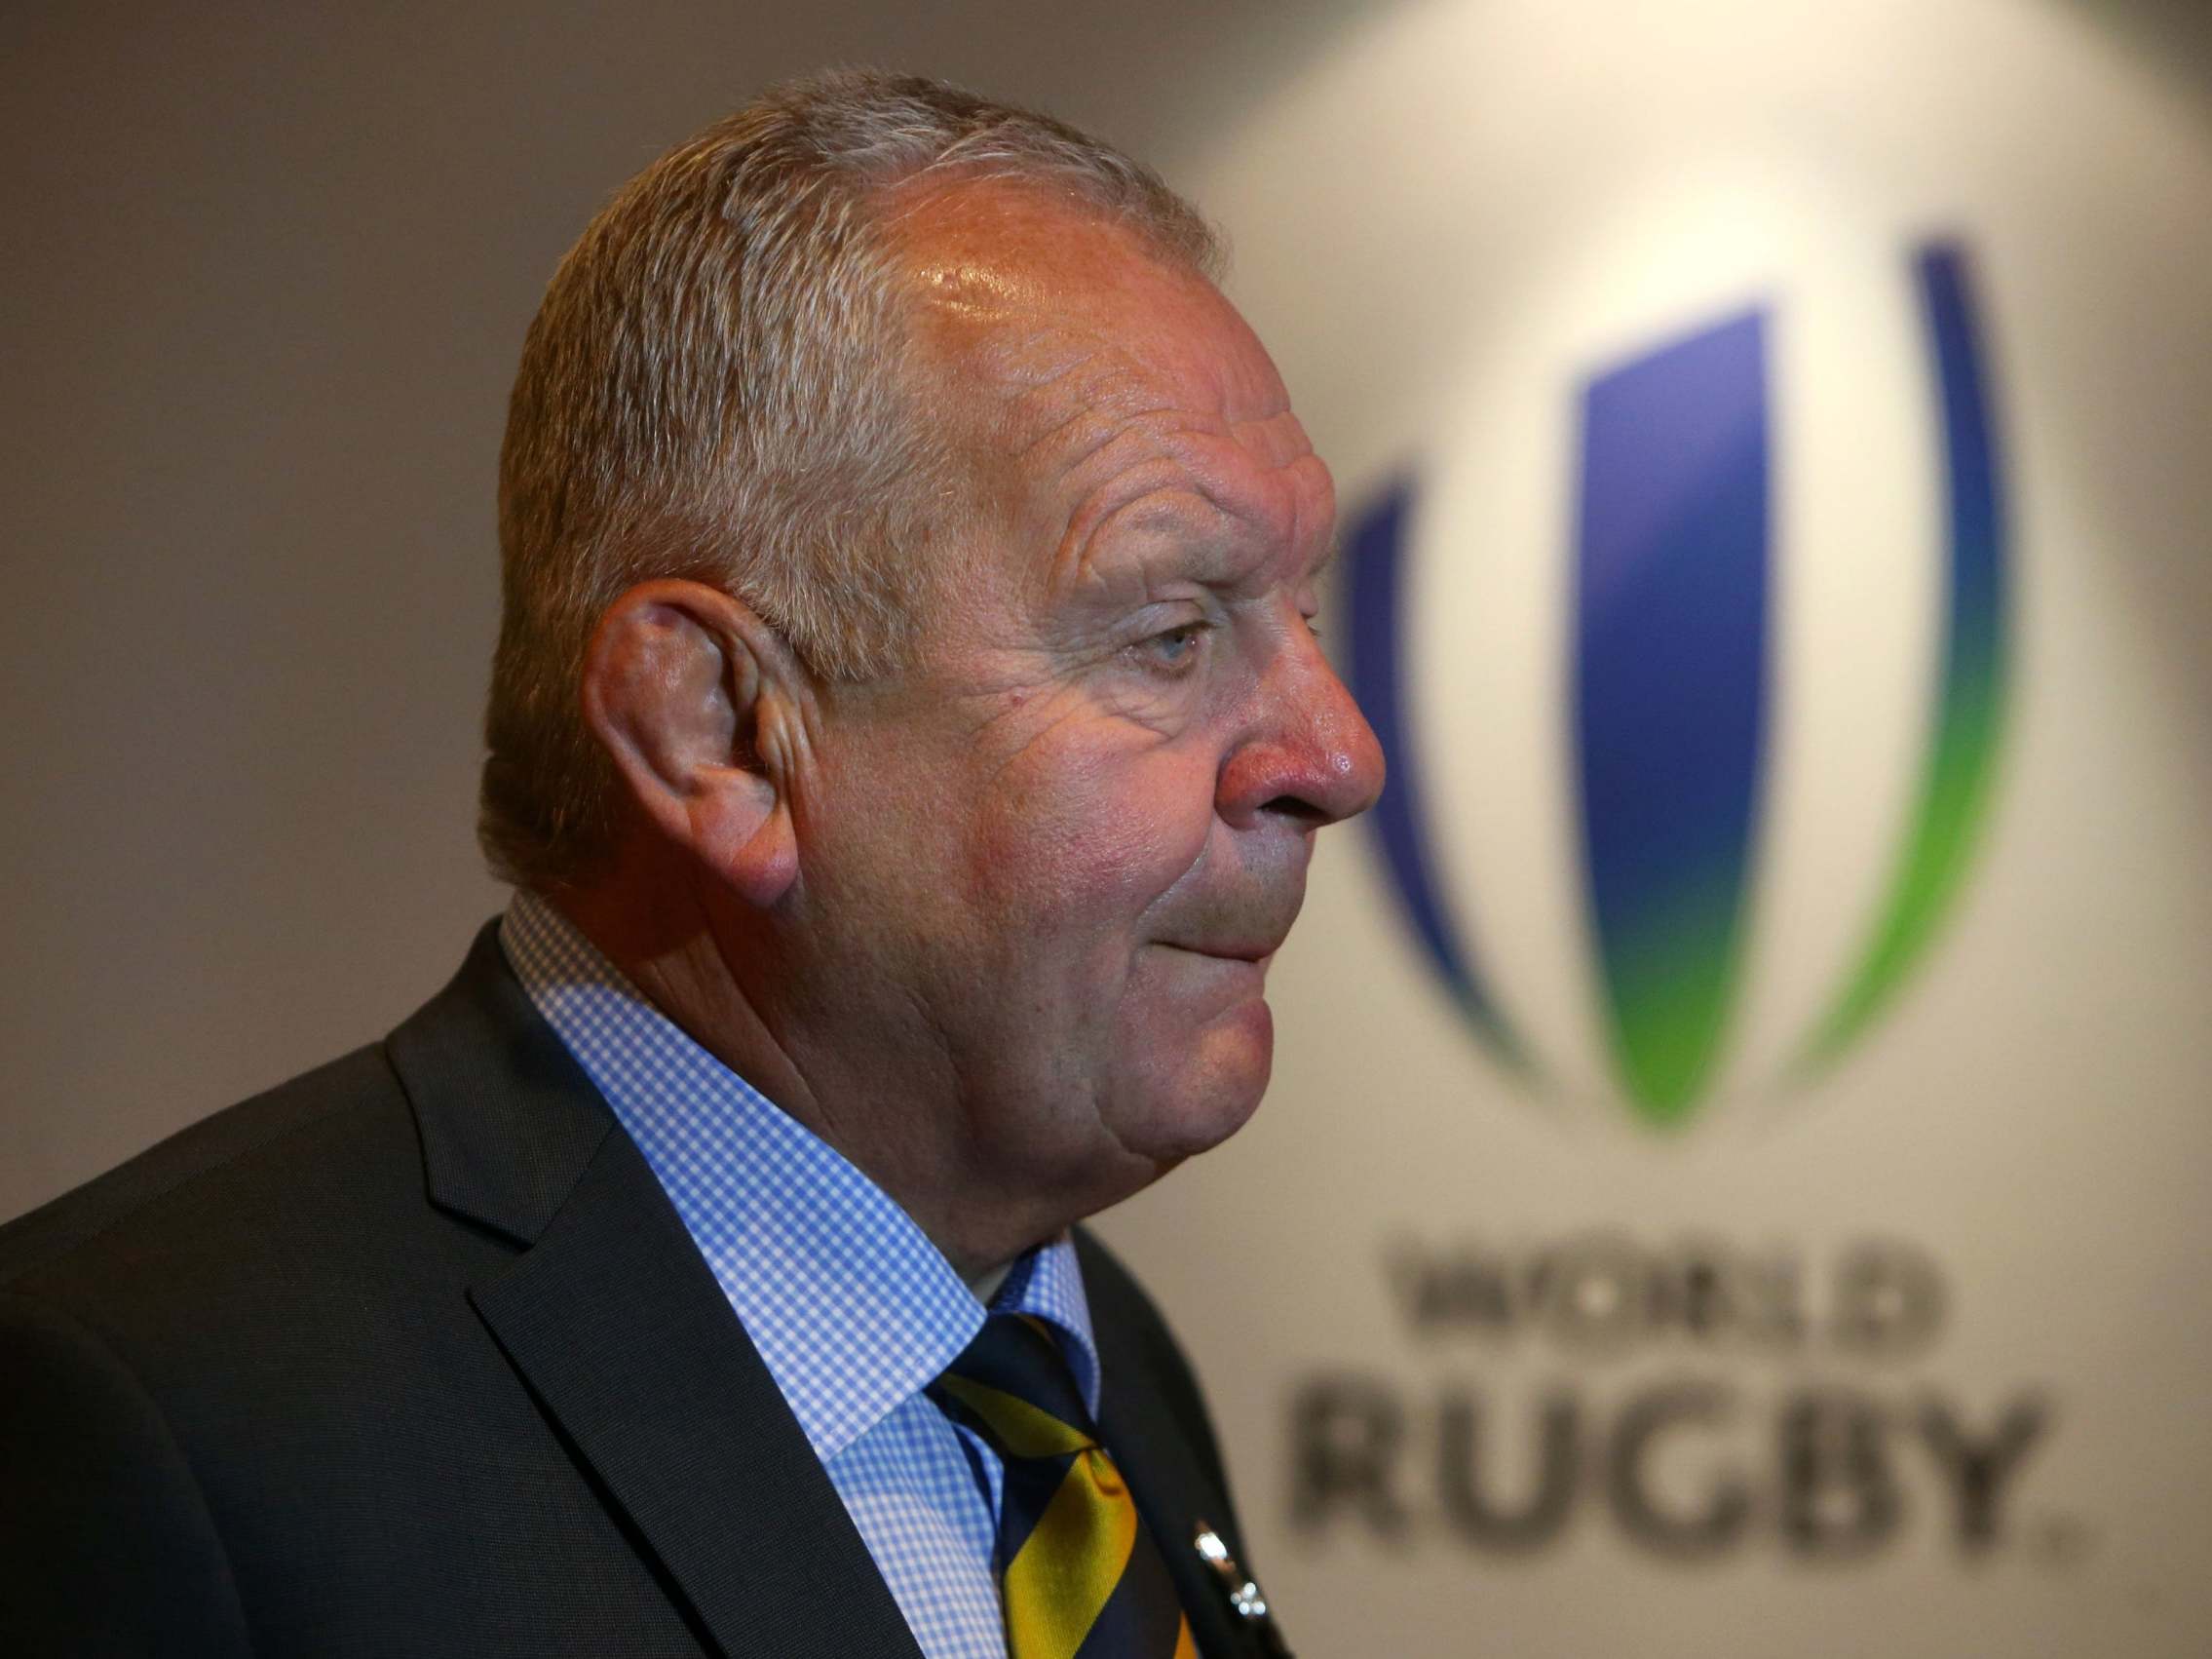 Beaumont has promised an independent review of World Rugby if re-elected